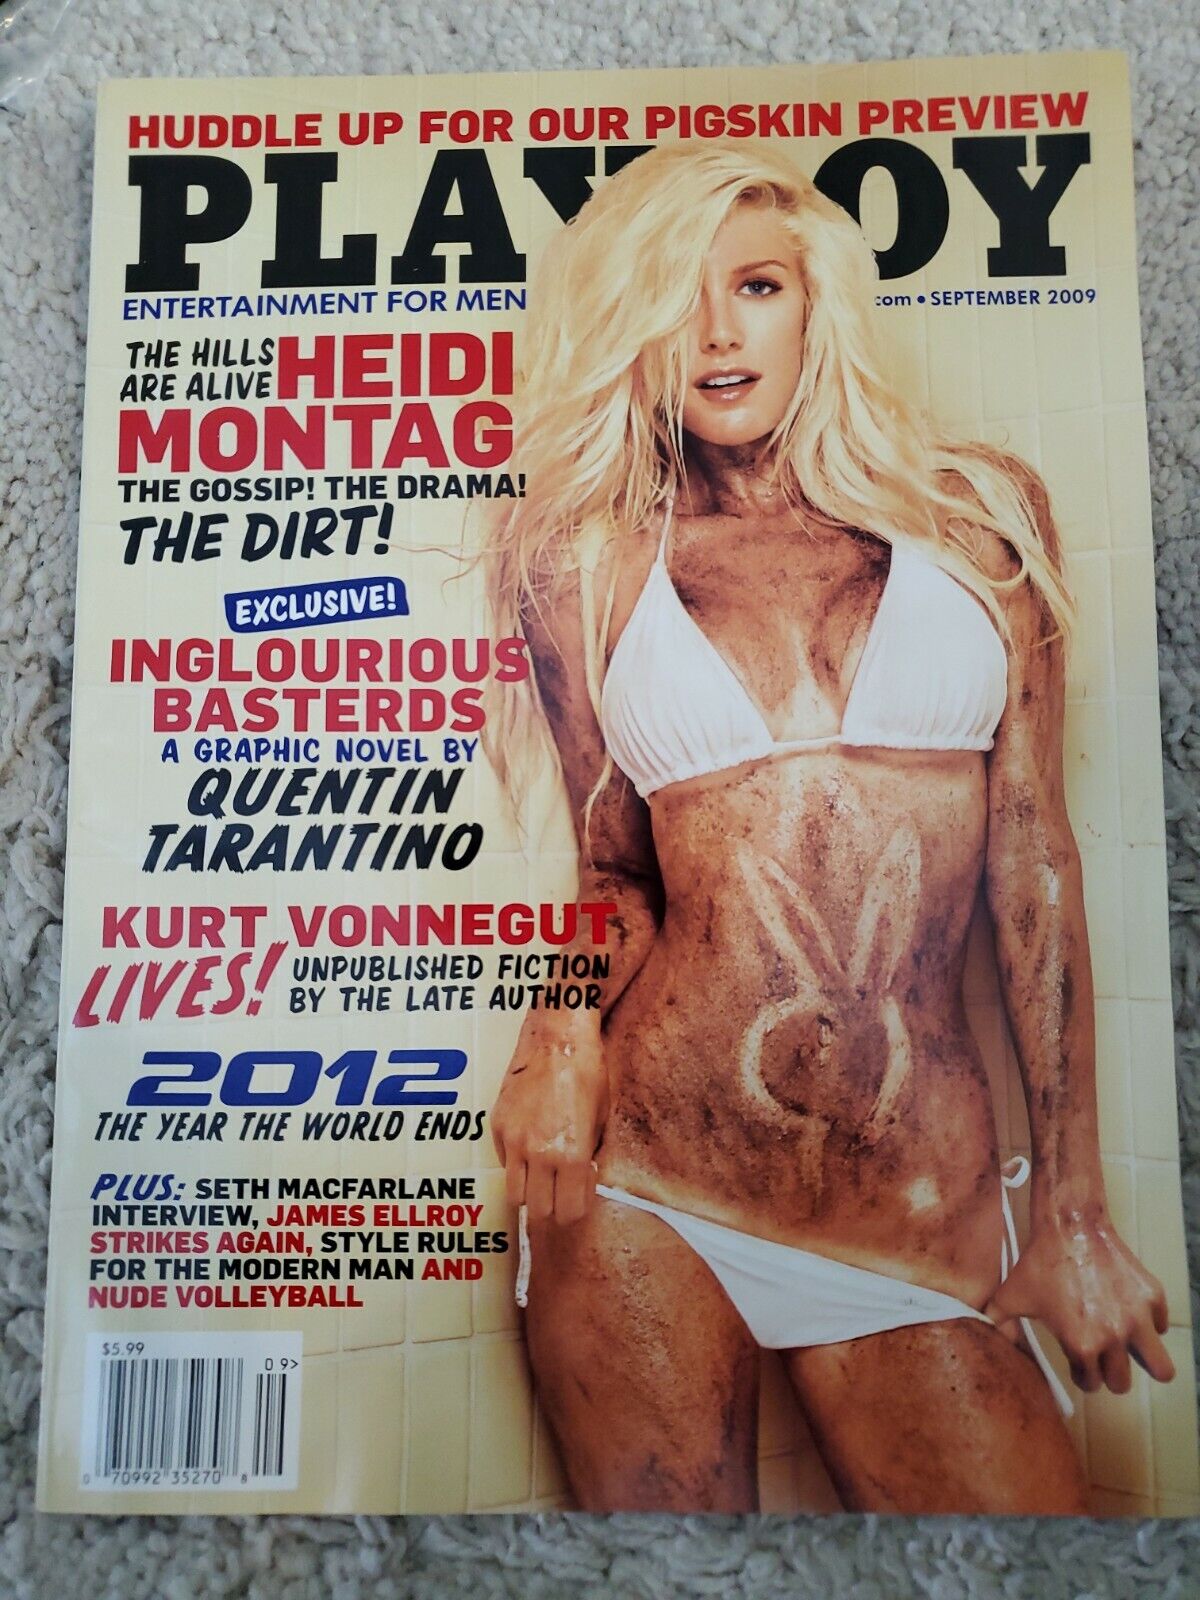 cindy melchor recommends heidi montag playboy nude pic